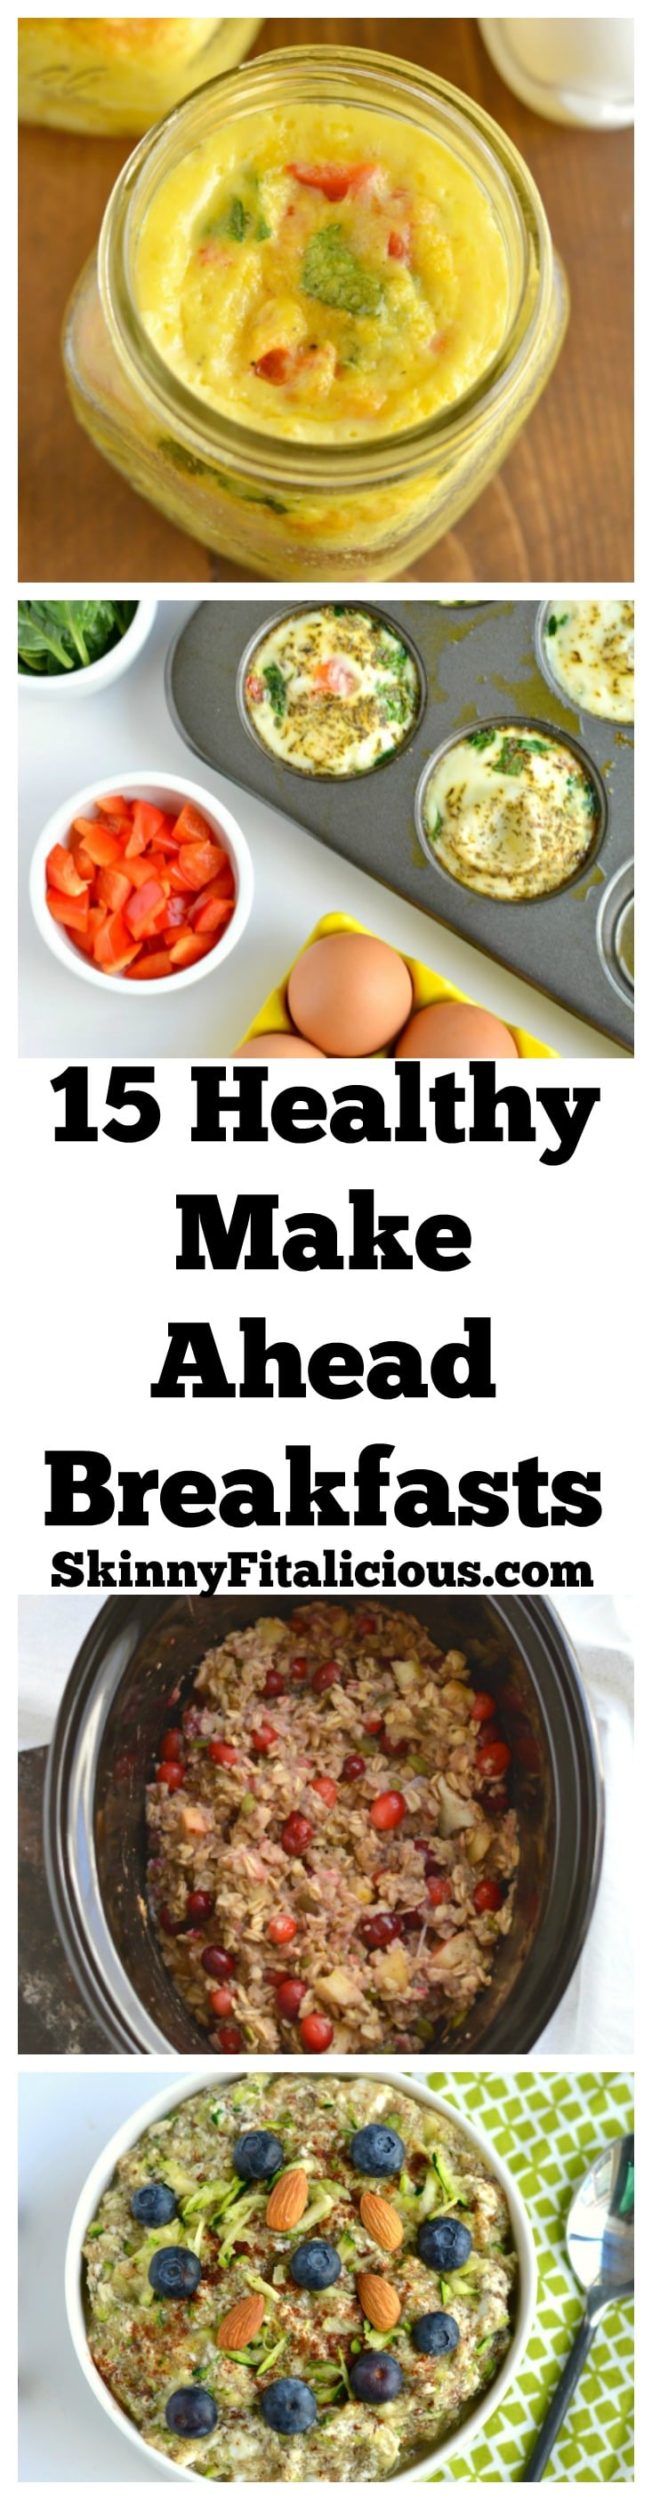 Many people skip breakfast saying they don't have time. Here's 15 Healthy Make Ahead Breakfasts to make breakfast a reality on those busy mornings.